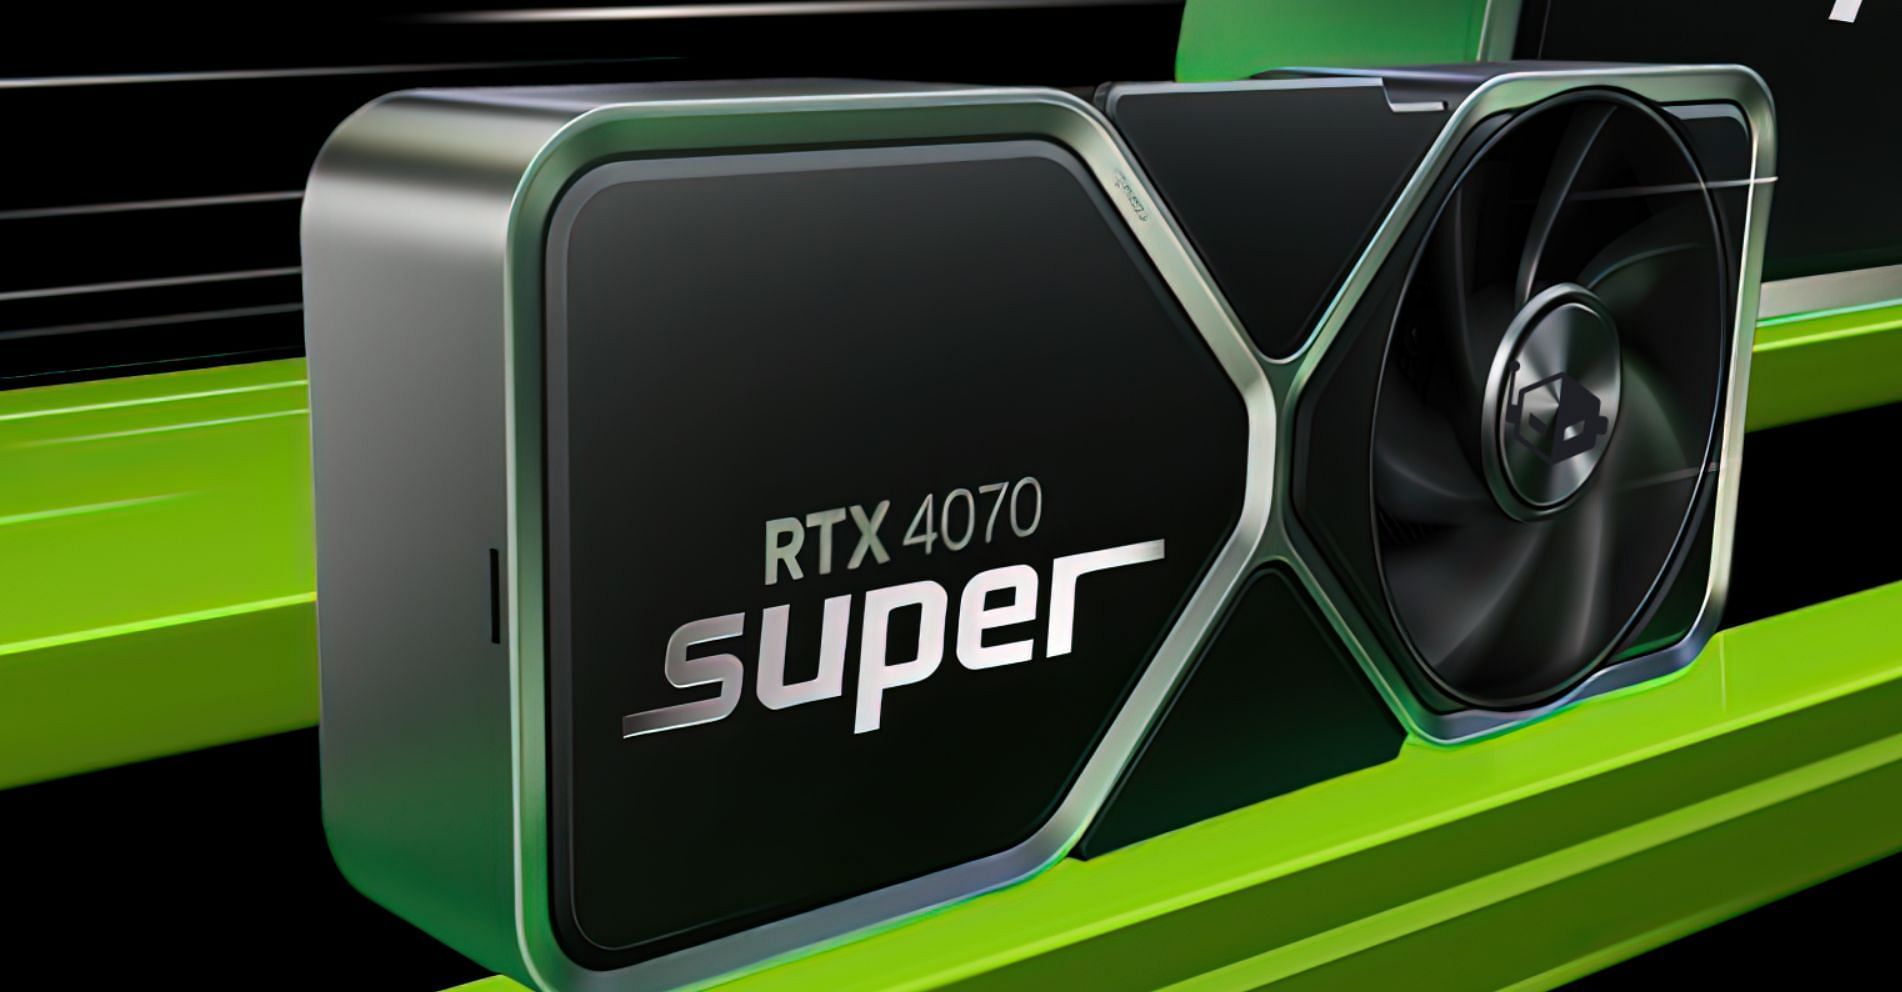 The Nvidia RTX 4070 Super is currently available for less than $600 after several price cuts (Image via Nvidia)